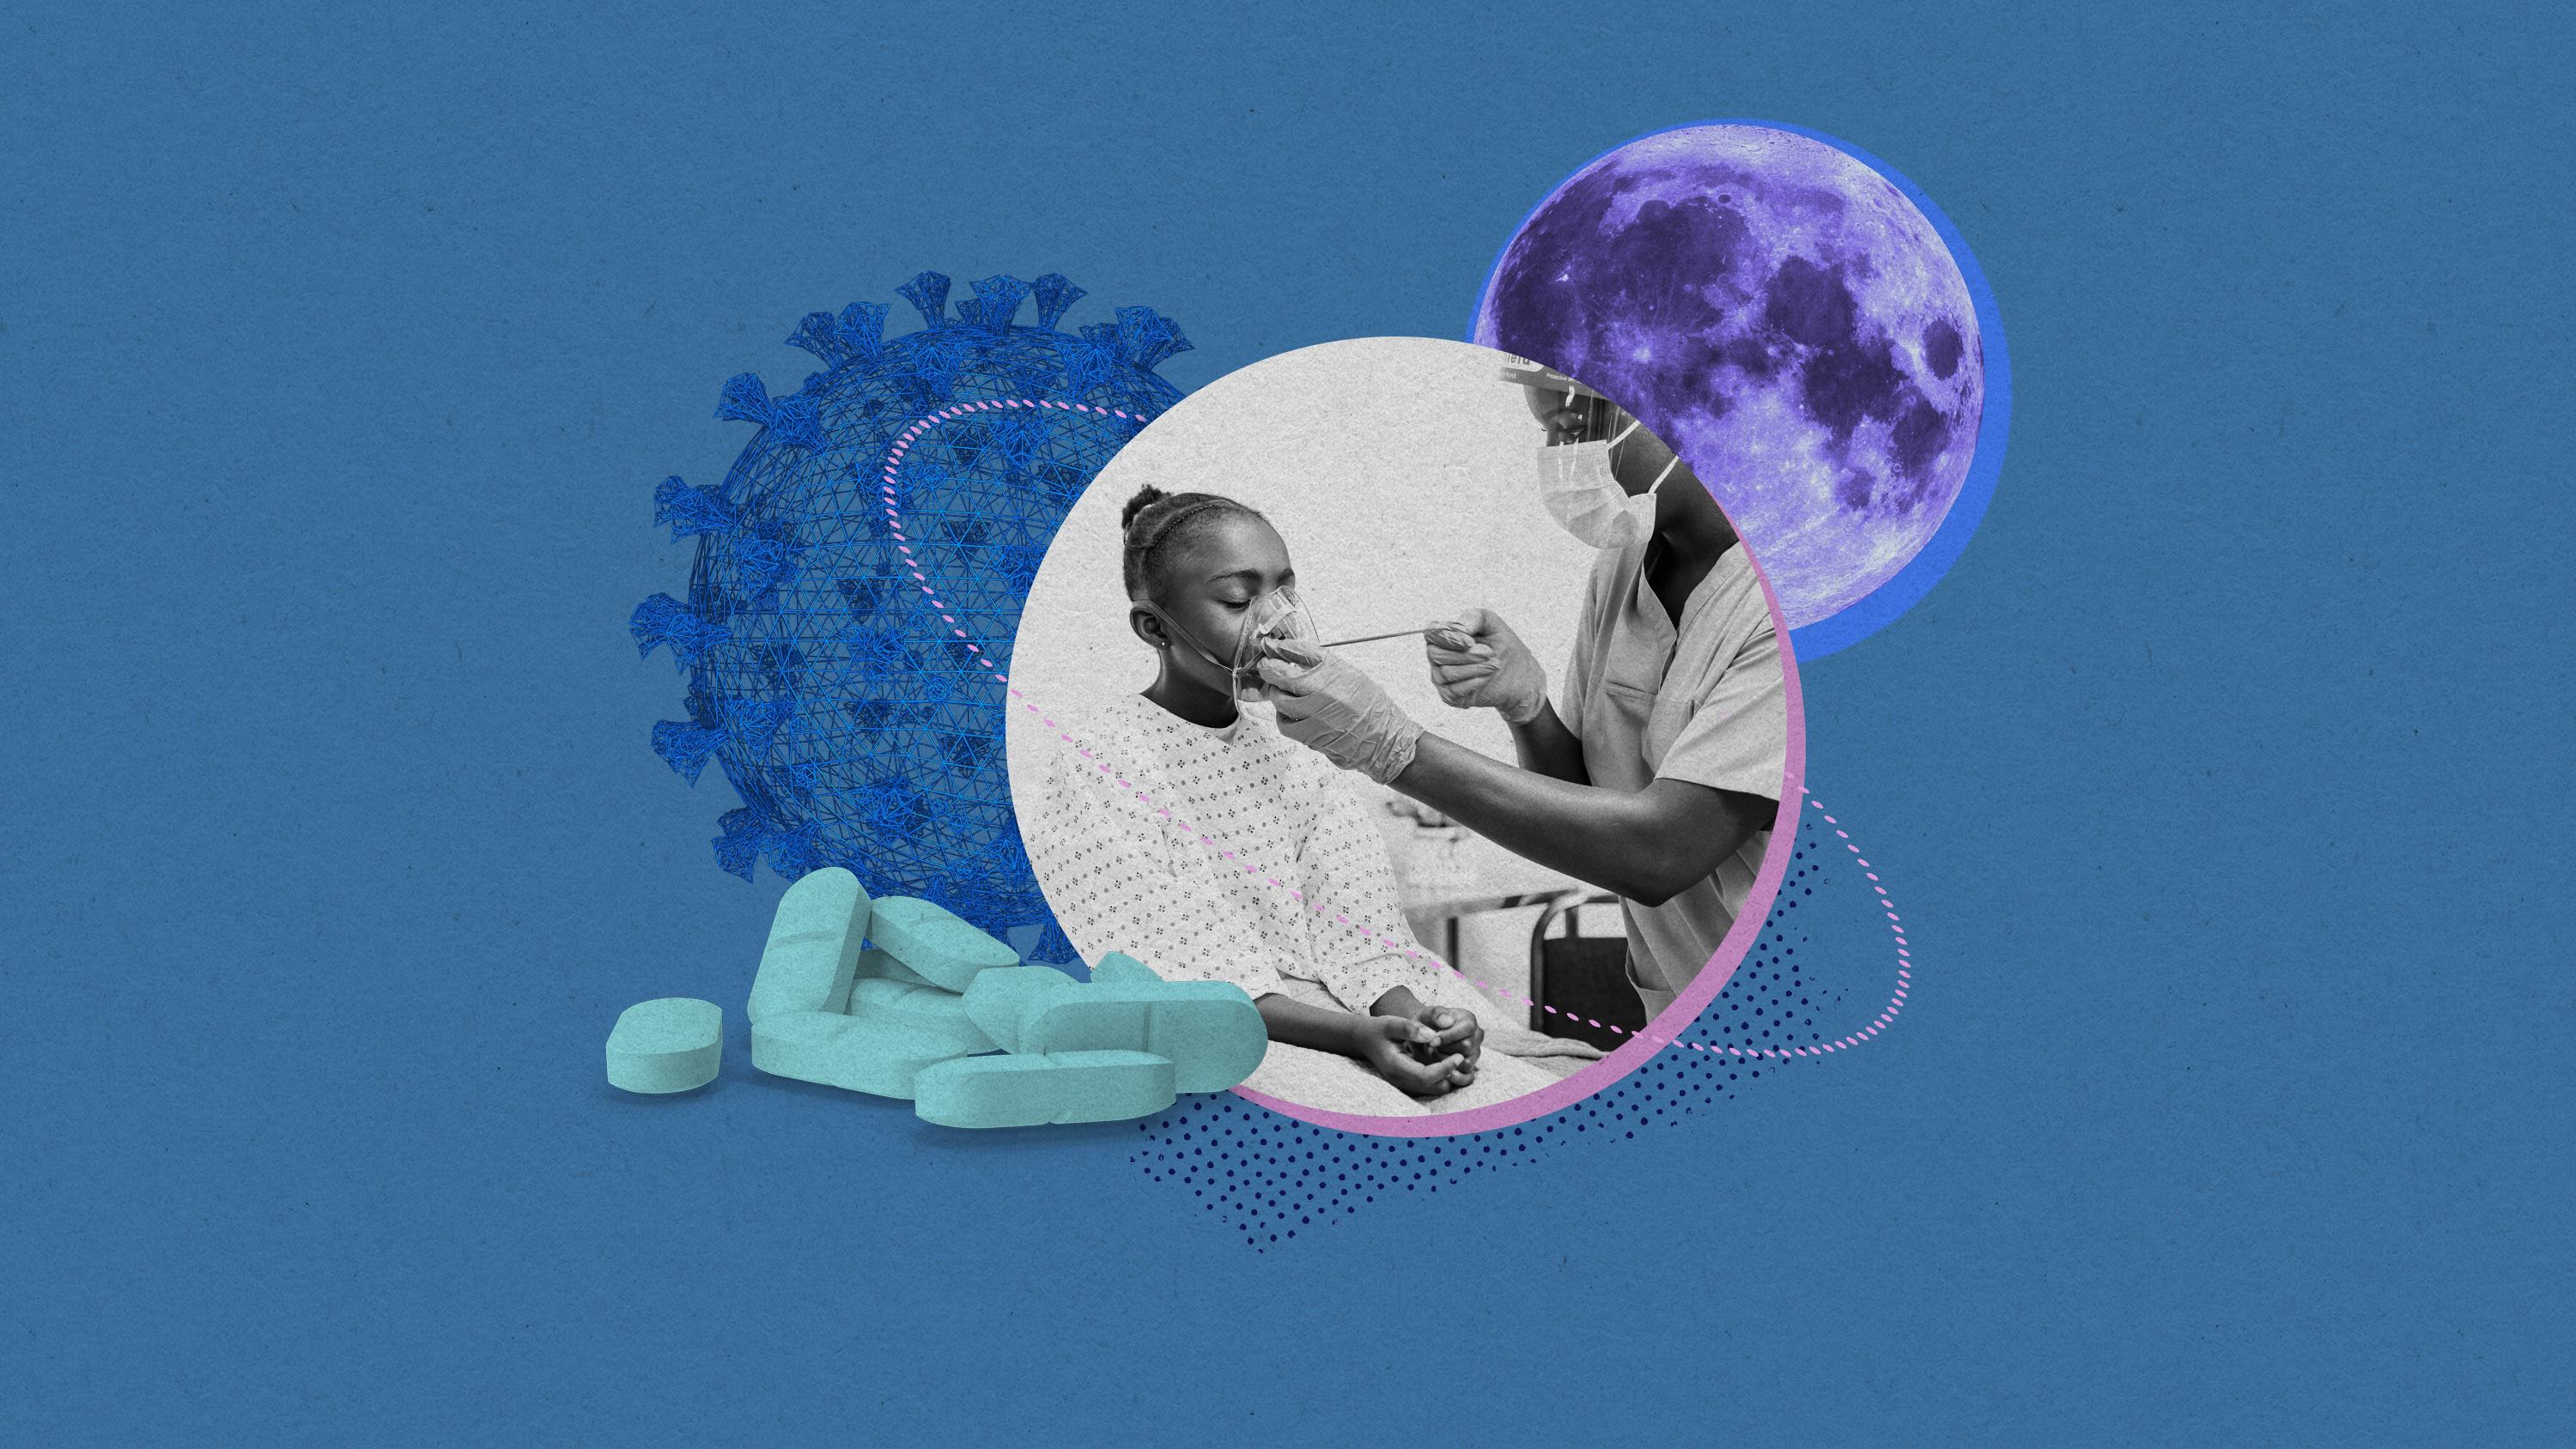 the moon, a cluster of pills, a model of the covid virus, and a young patient receiving oxygen